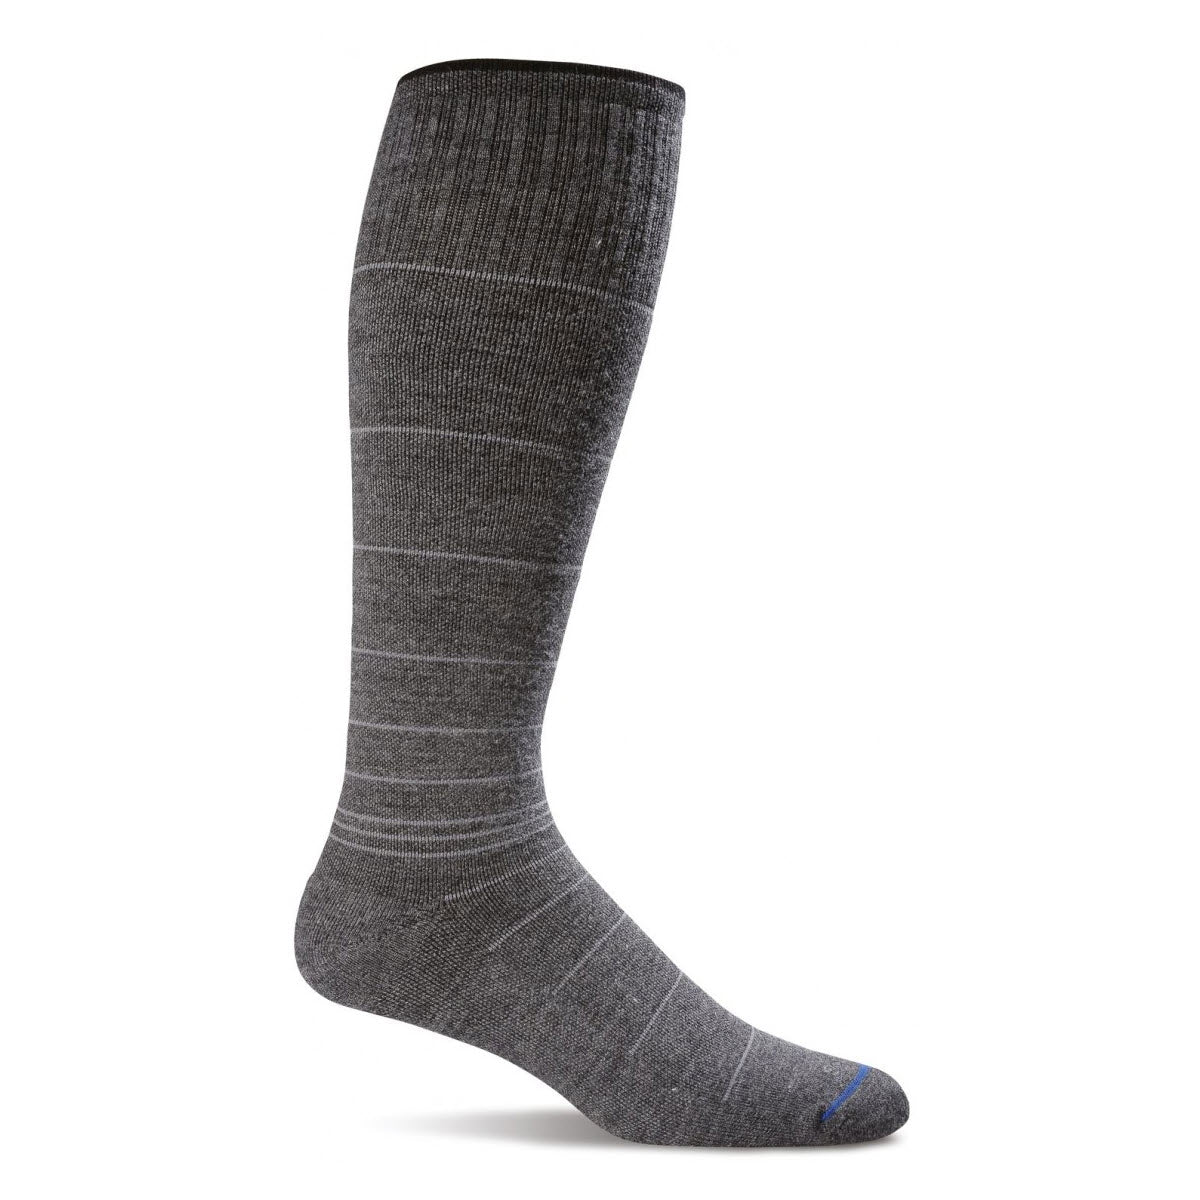 Gray Merino Wool Sockwell knee-high compression sock displayed against a white background.